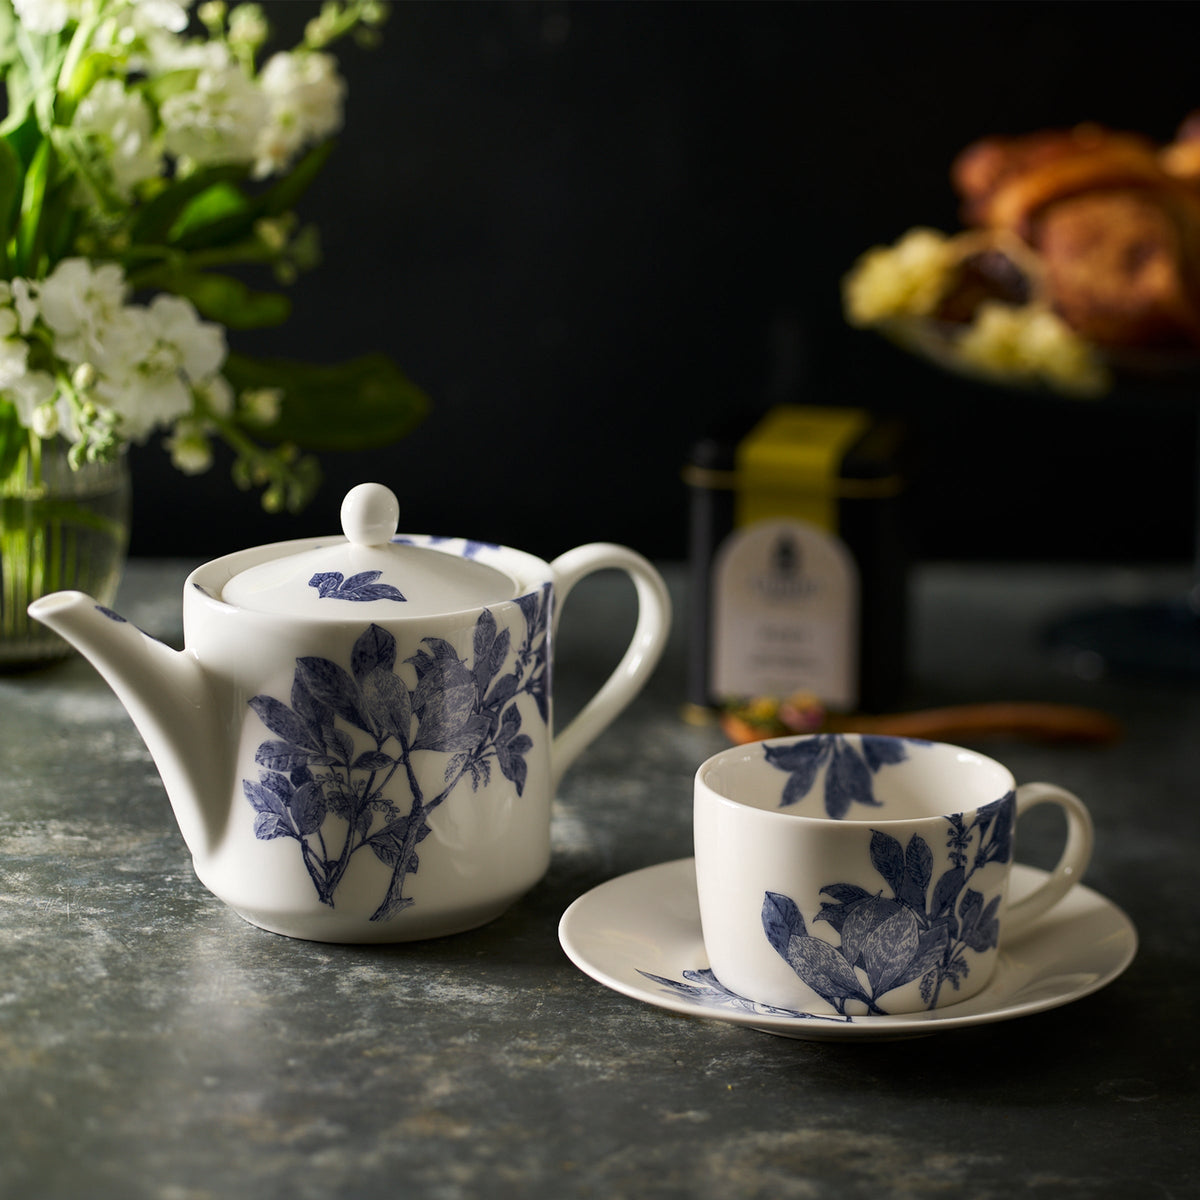 Arbor blue and white bone china teapot and tea cup and saucer from Caskata.